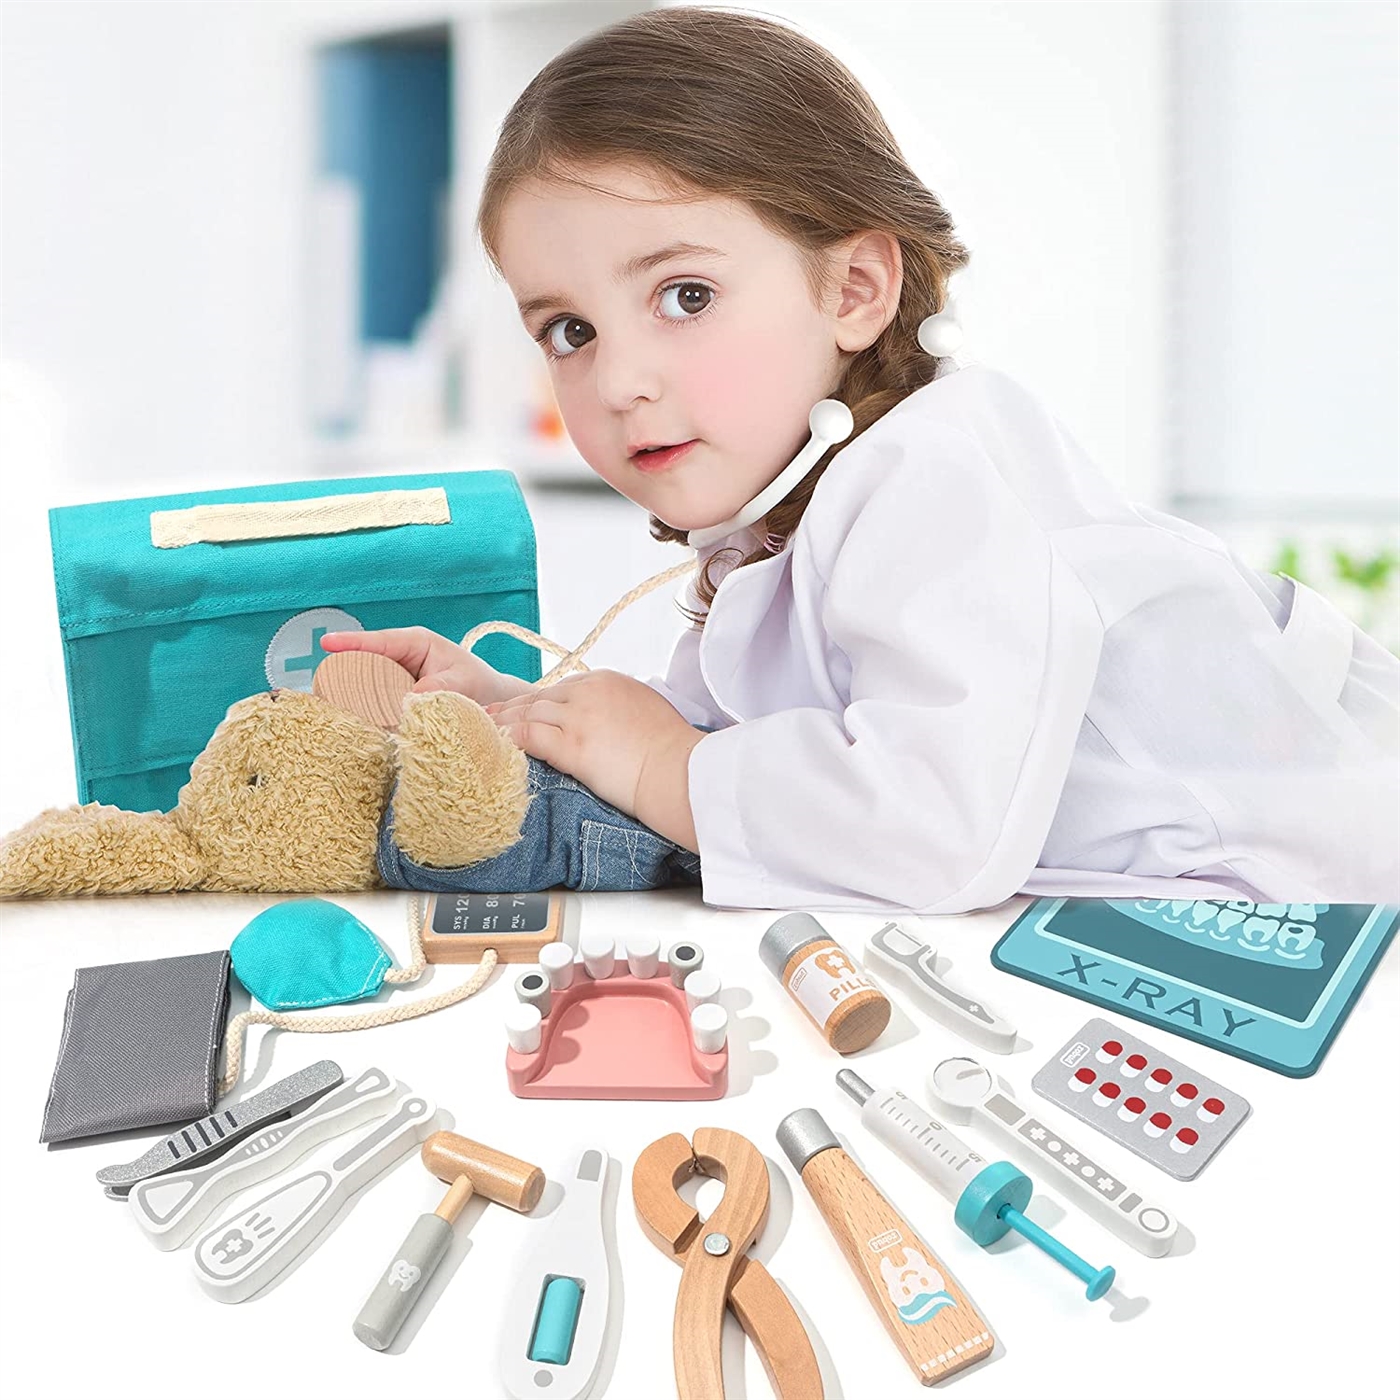 Kibtoy wooden Doctor kit, ideal for pretend play